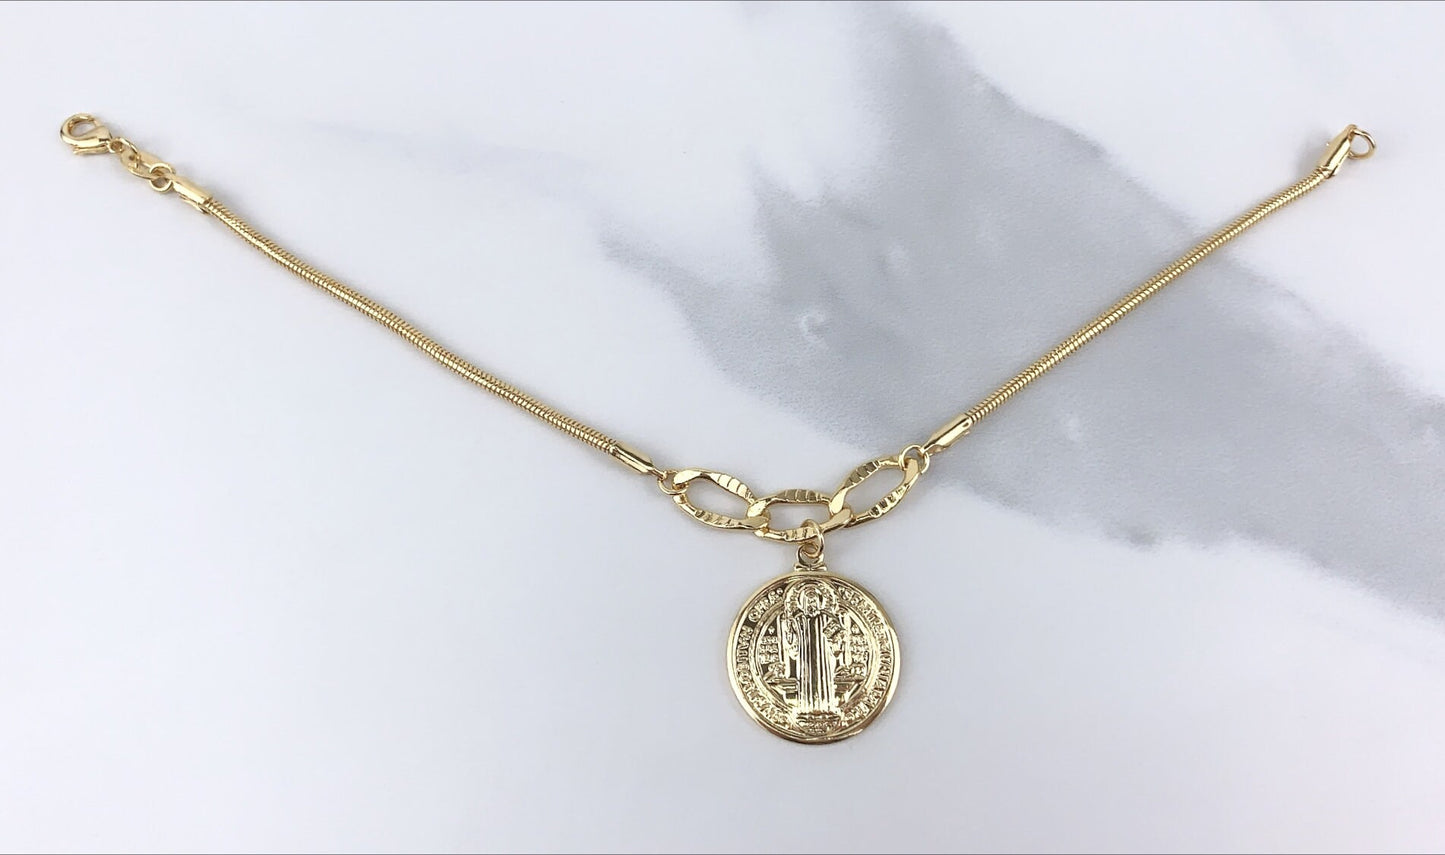 18k Gold Filled 8 inches Snake Chain Saint Benedict Coin Charm Chain Link, Bracelet  For Wholesale and Jewelry Supplies